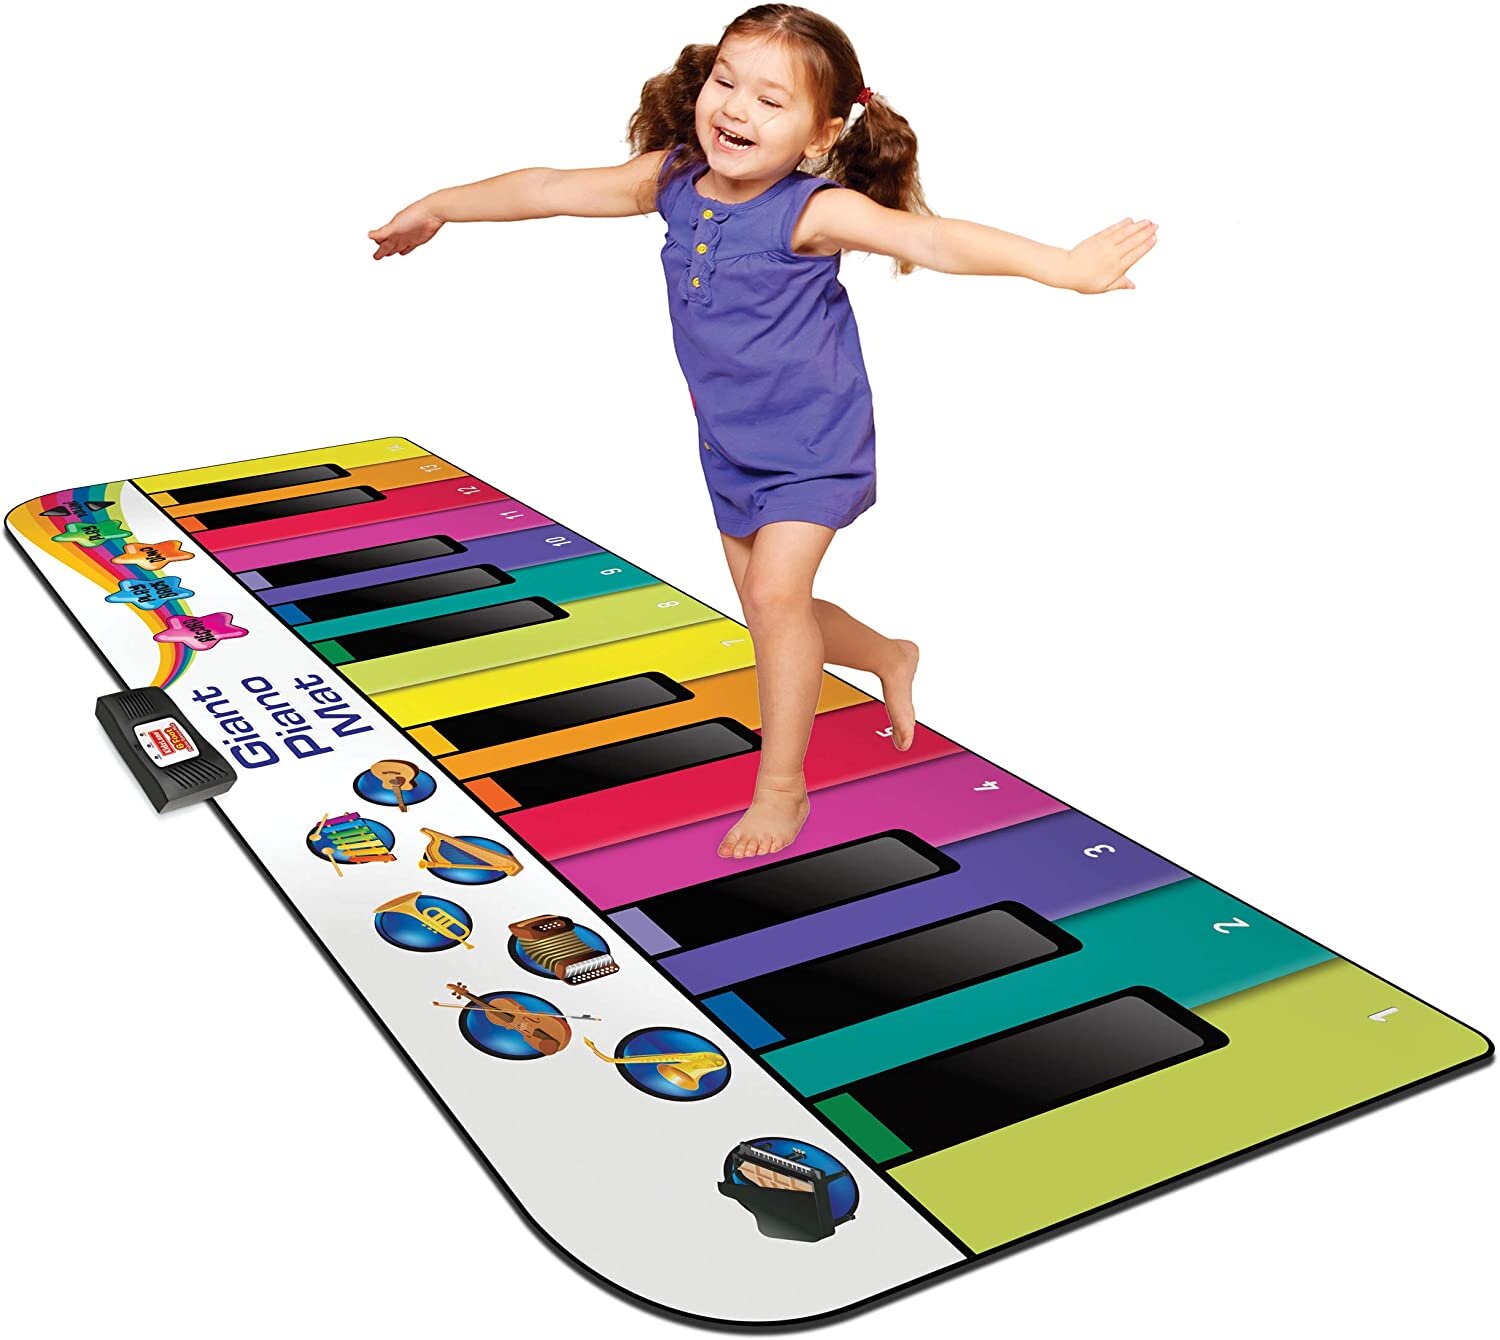 Kids Musical Keyboard Piano Mat Music Play Blanket Dance Mat with 8 Different Animal Sound for Toddler Baby Boys Girls Children OTTOLIVES Piano Mat Early Learning Education Toy Gift Music mat 